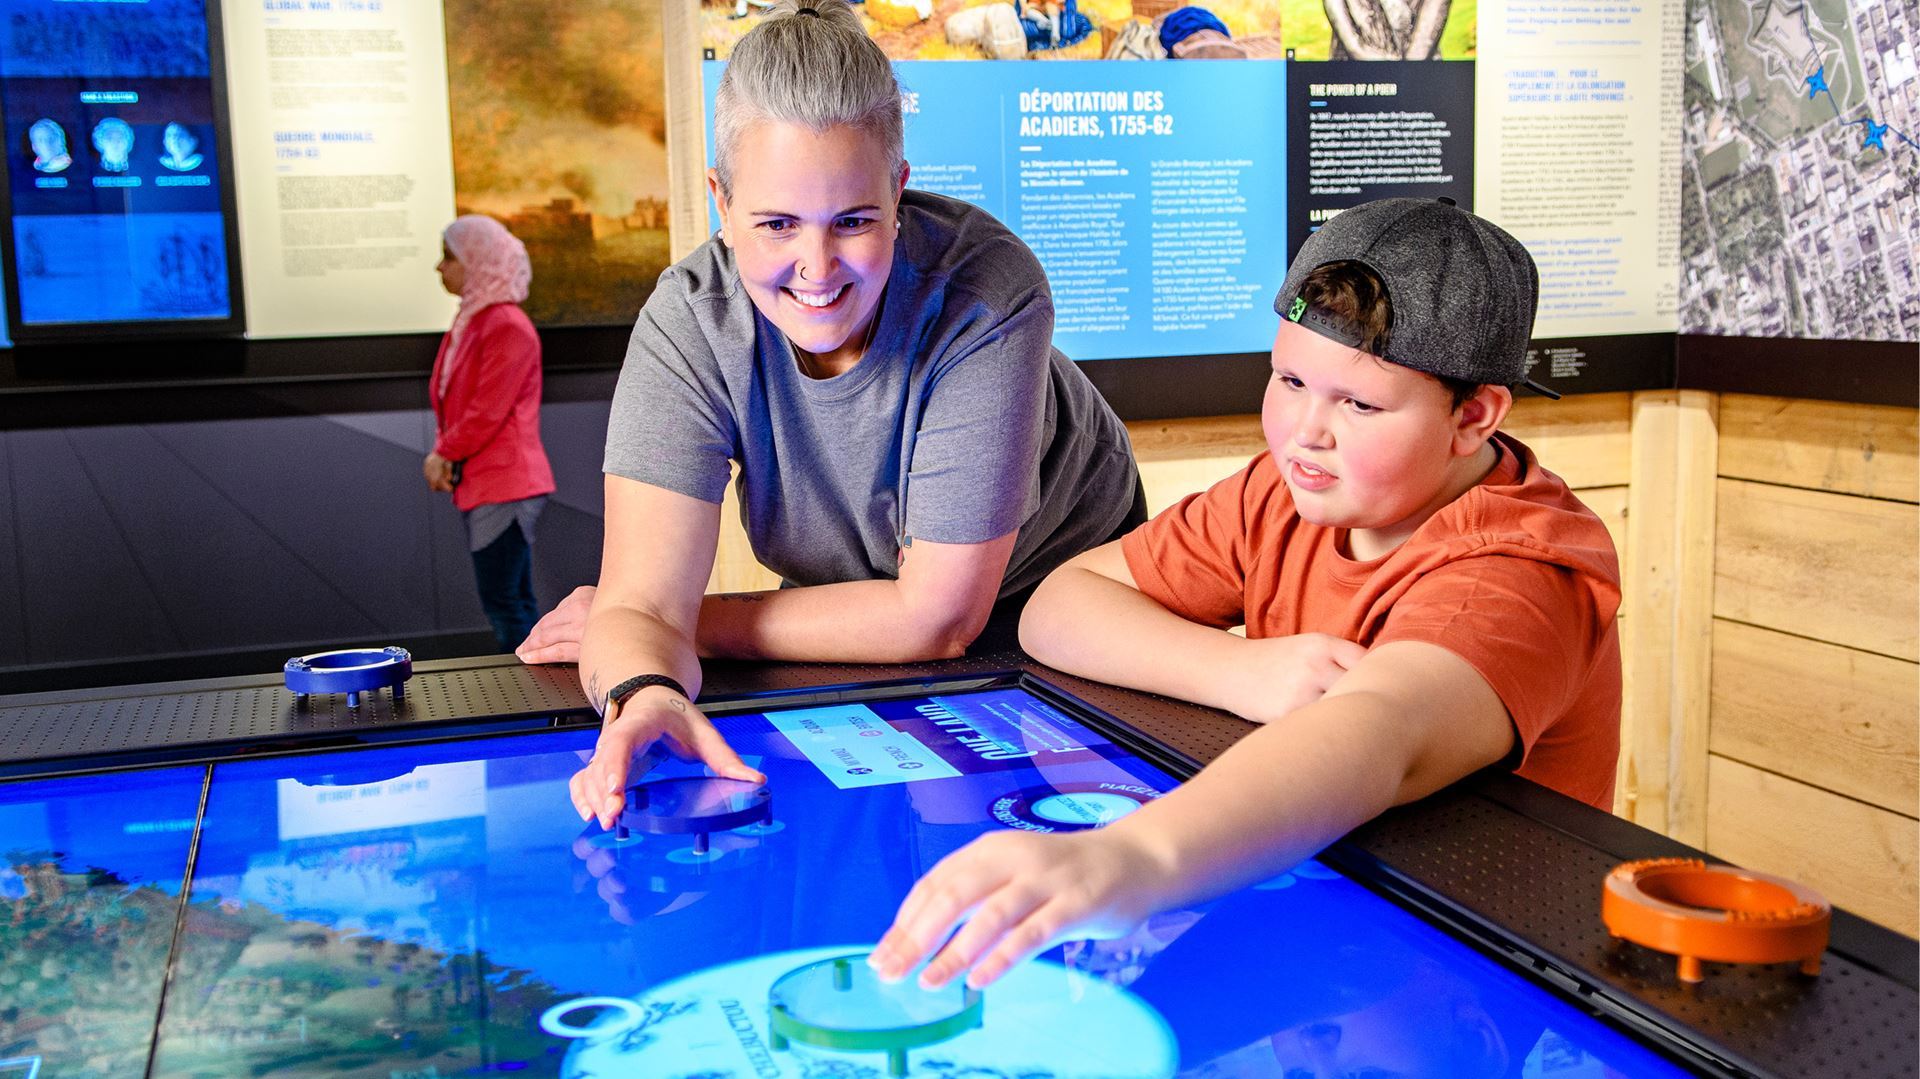 A woman and boy interact with a digital map on the illuminated surface of a table-based interactive.